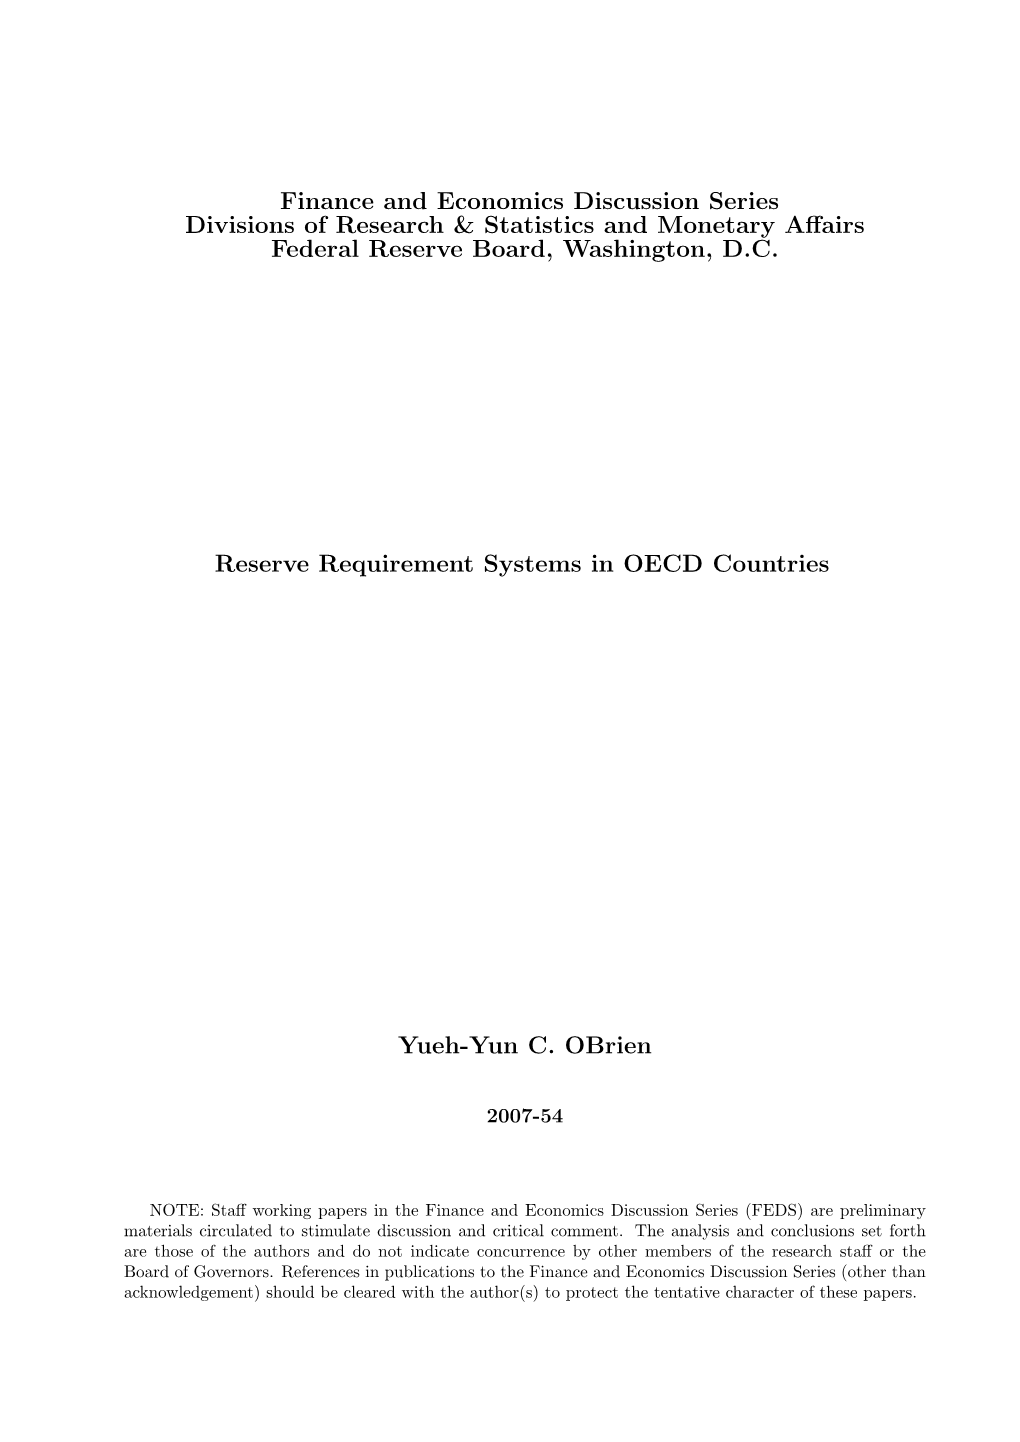 Reserve Requirement Systems in OECD Countries